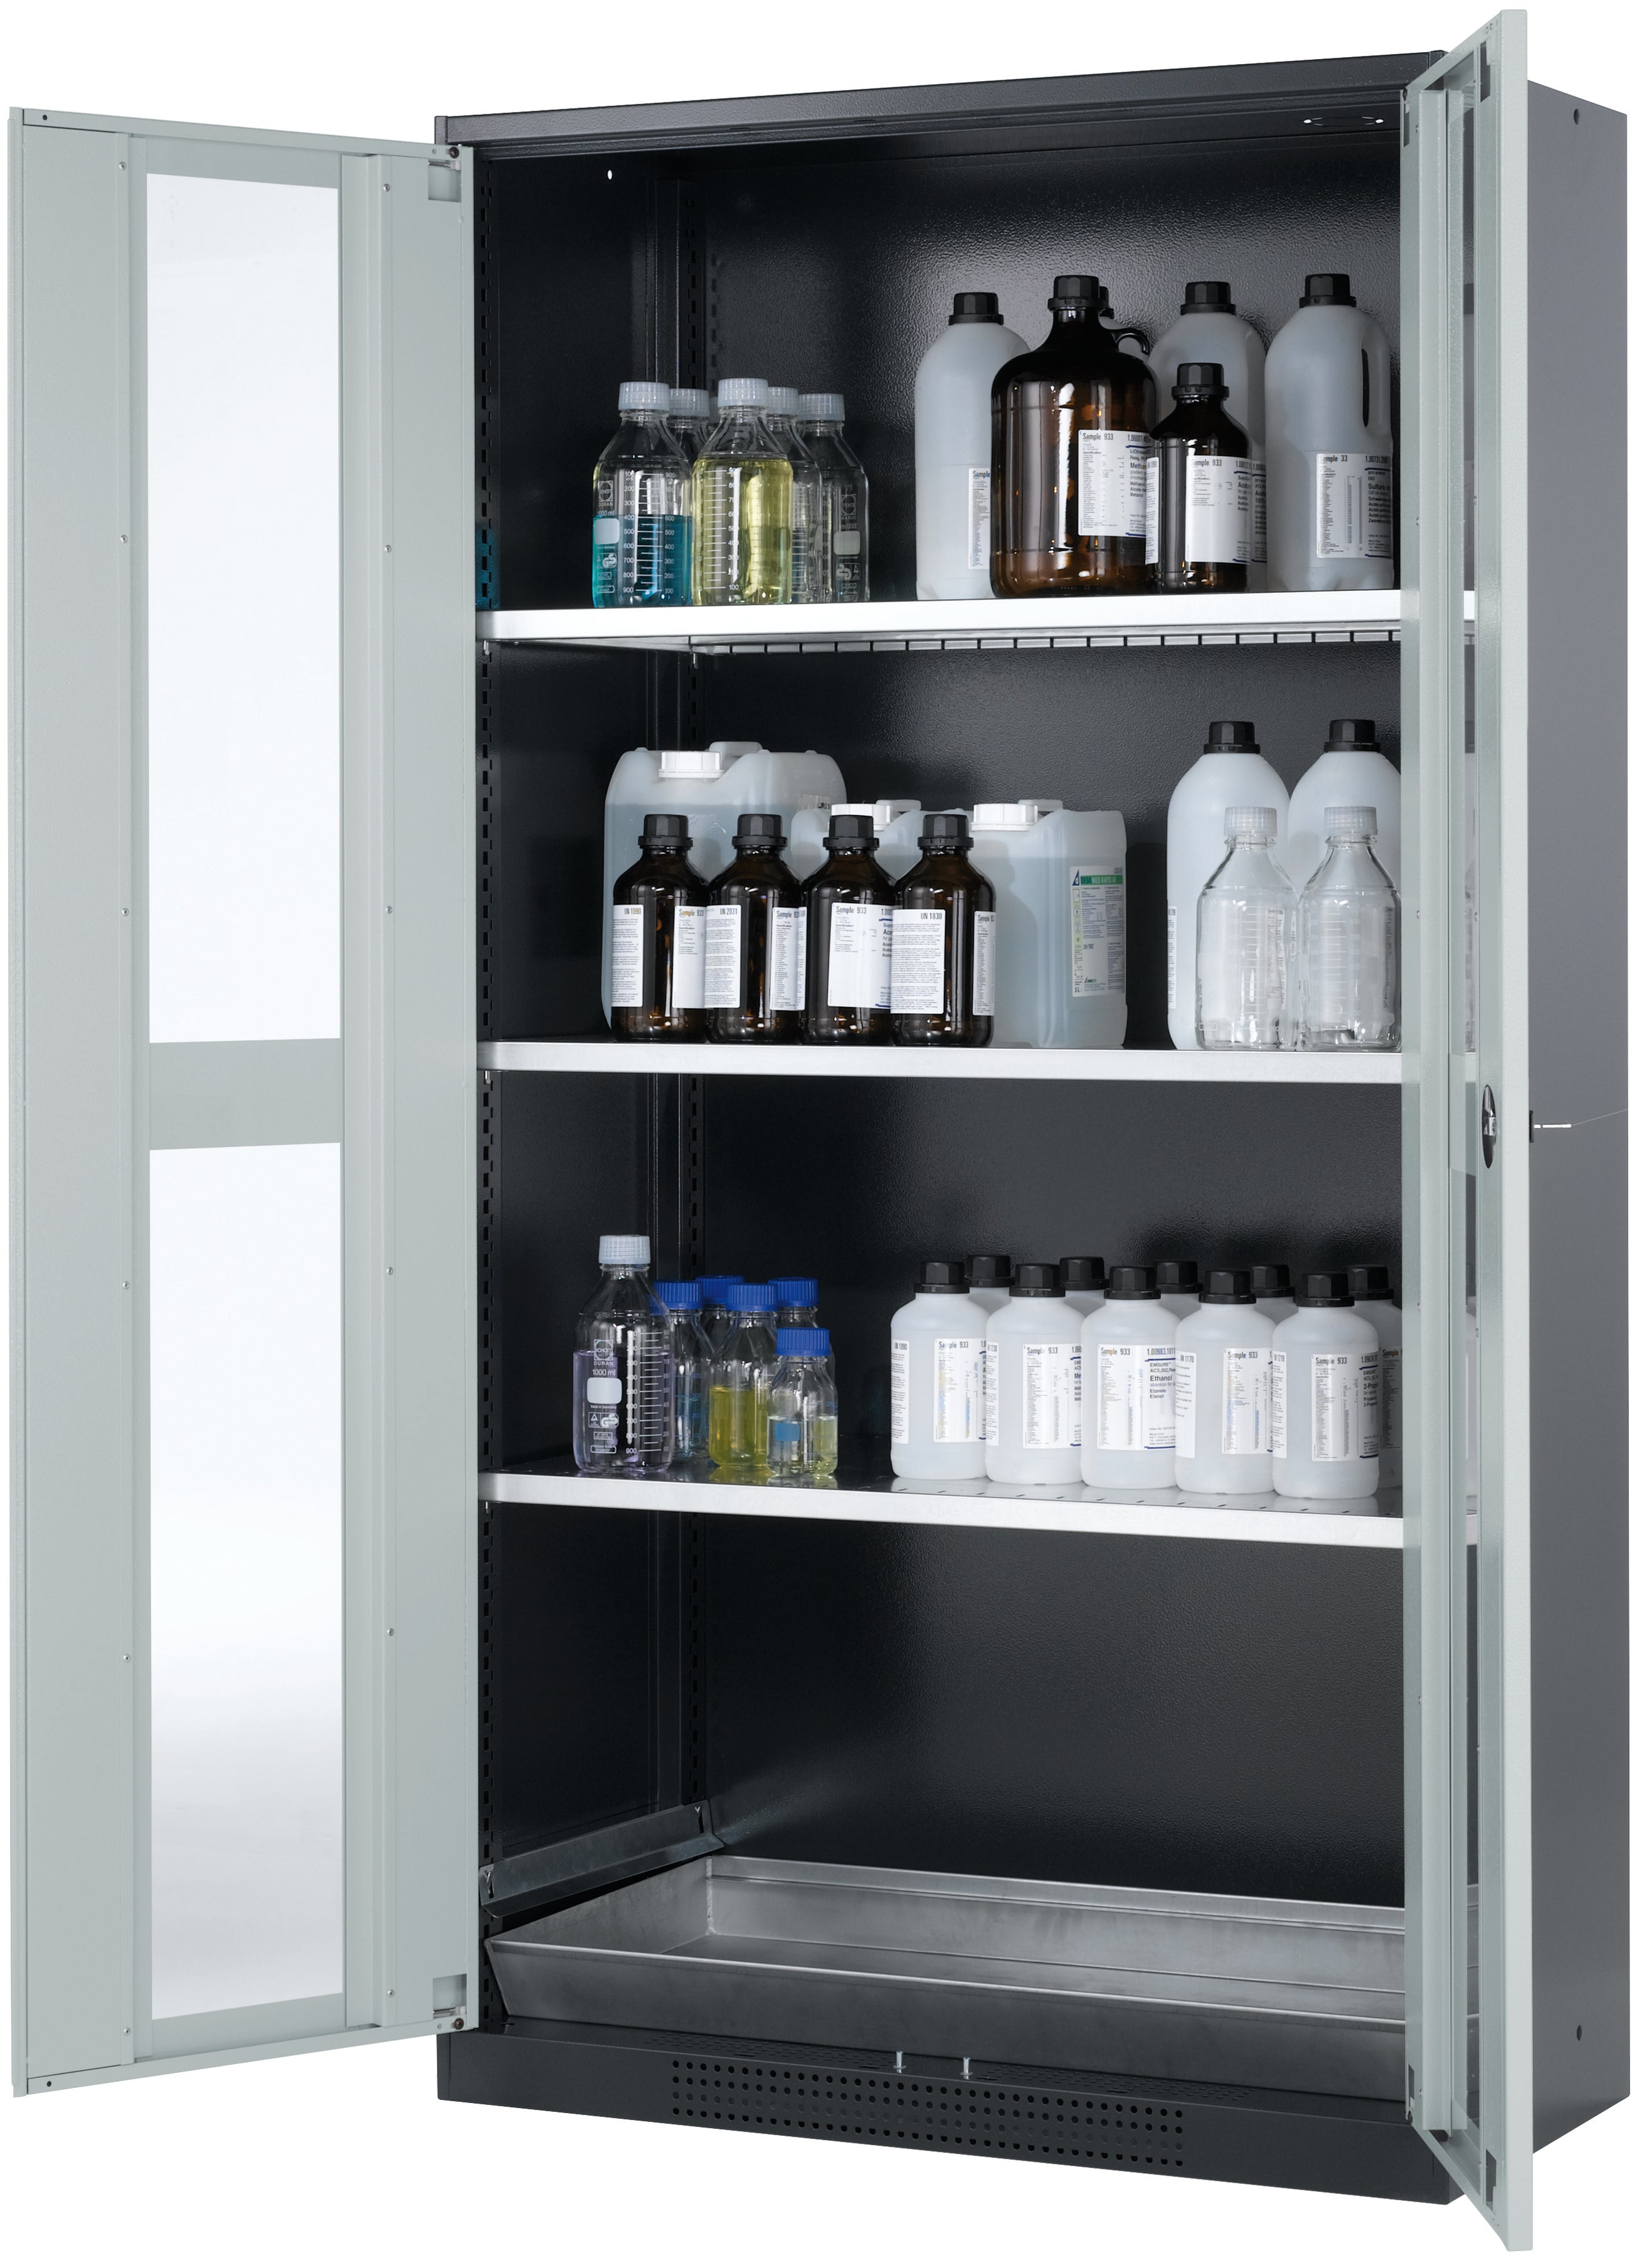 Chemical cabinet CS-CLASSIC-G model CS.195.105.WDFW in light gray RAL 7035 with 3x standard shelves (sheet steel)